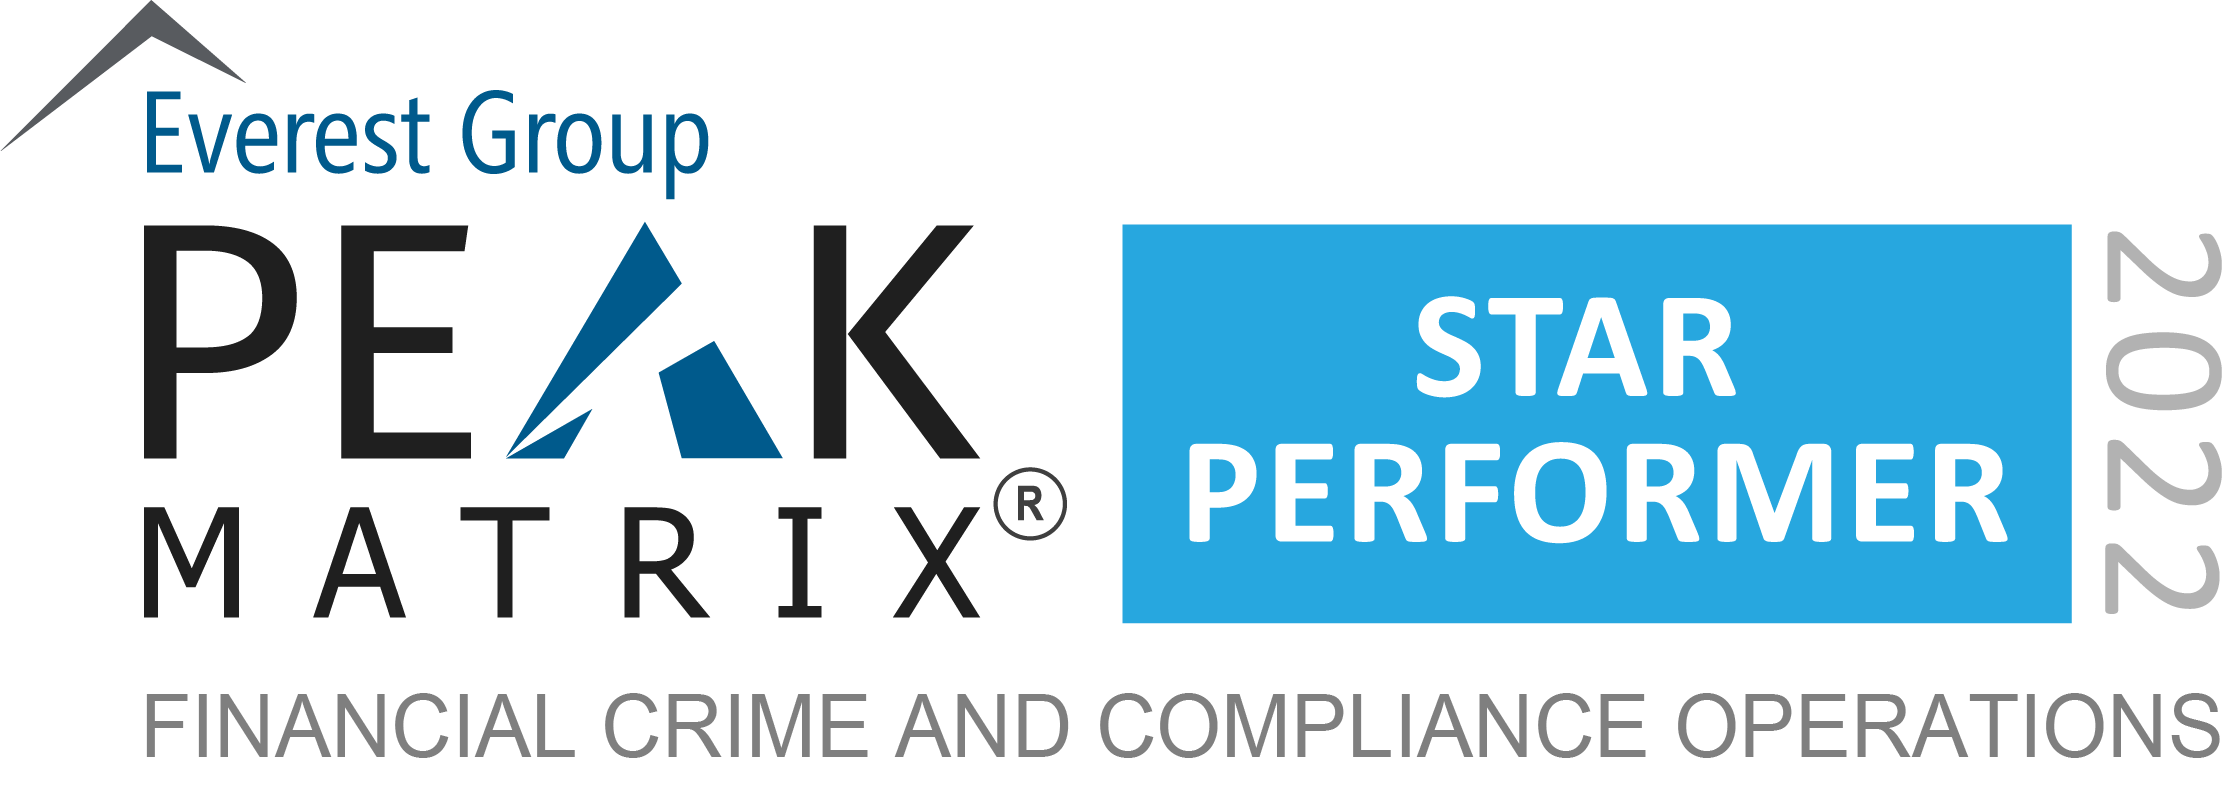 Peak matrix financial crome and compliance operations